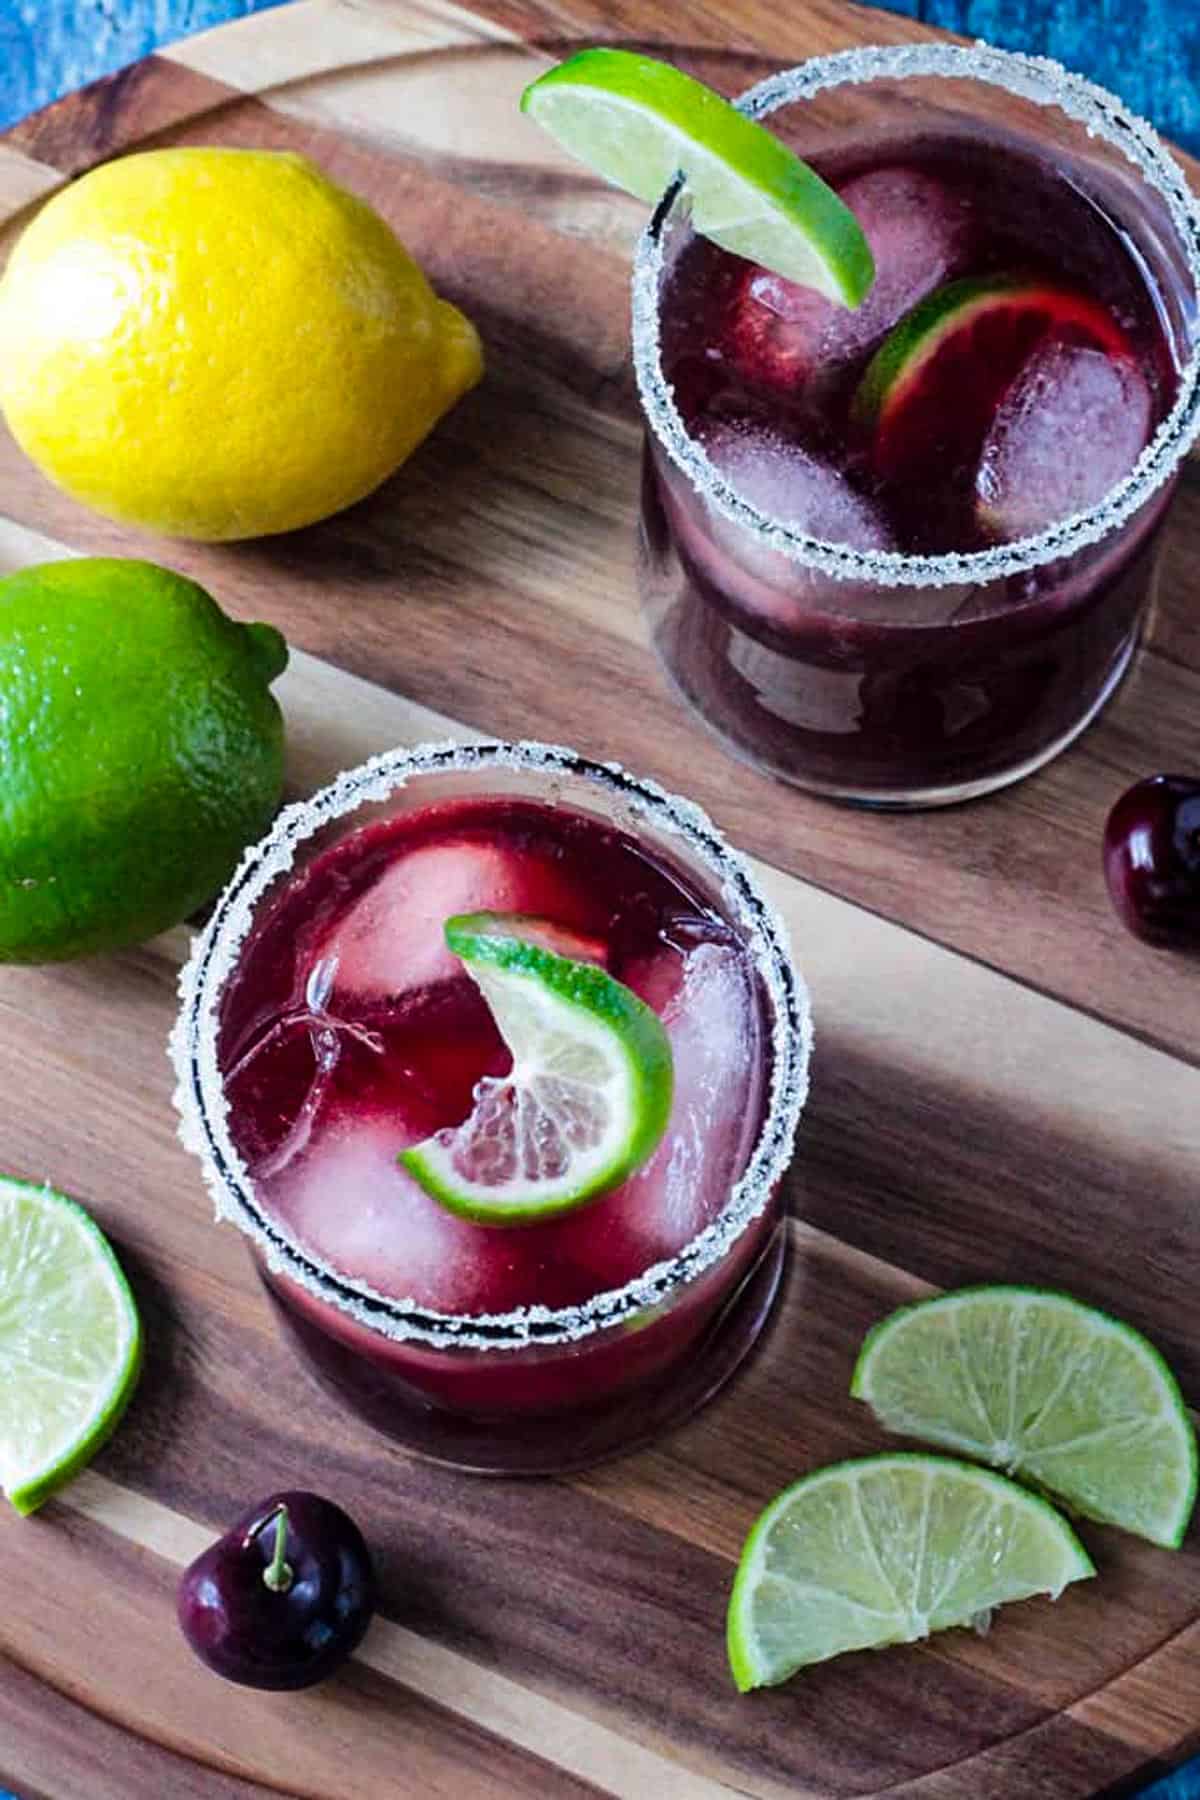 Two glasses of red juice drink on a circular wooden serving tray with lemons and limes.